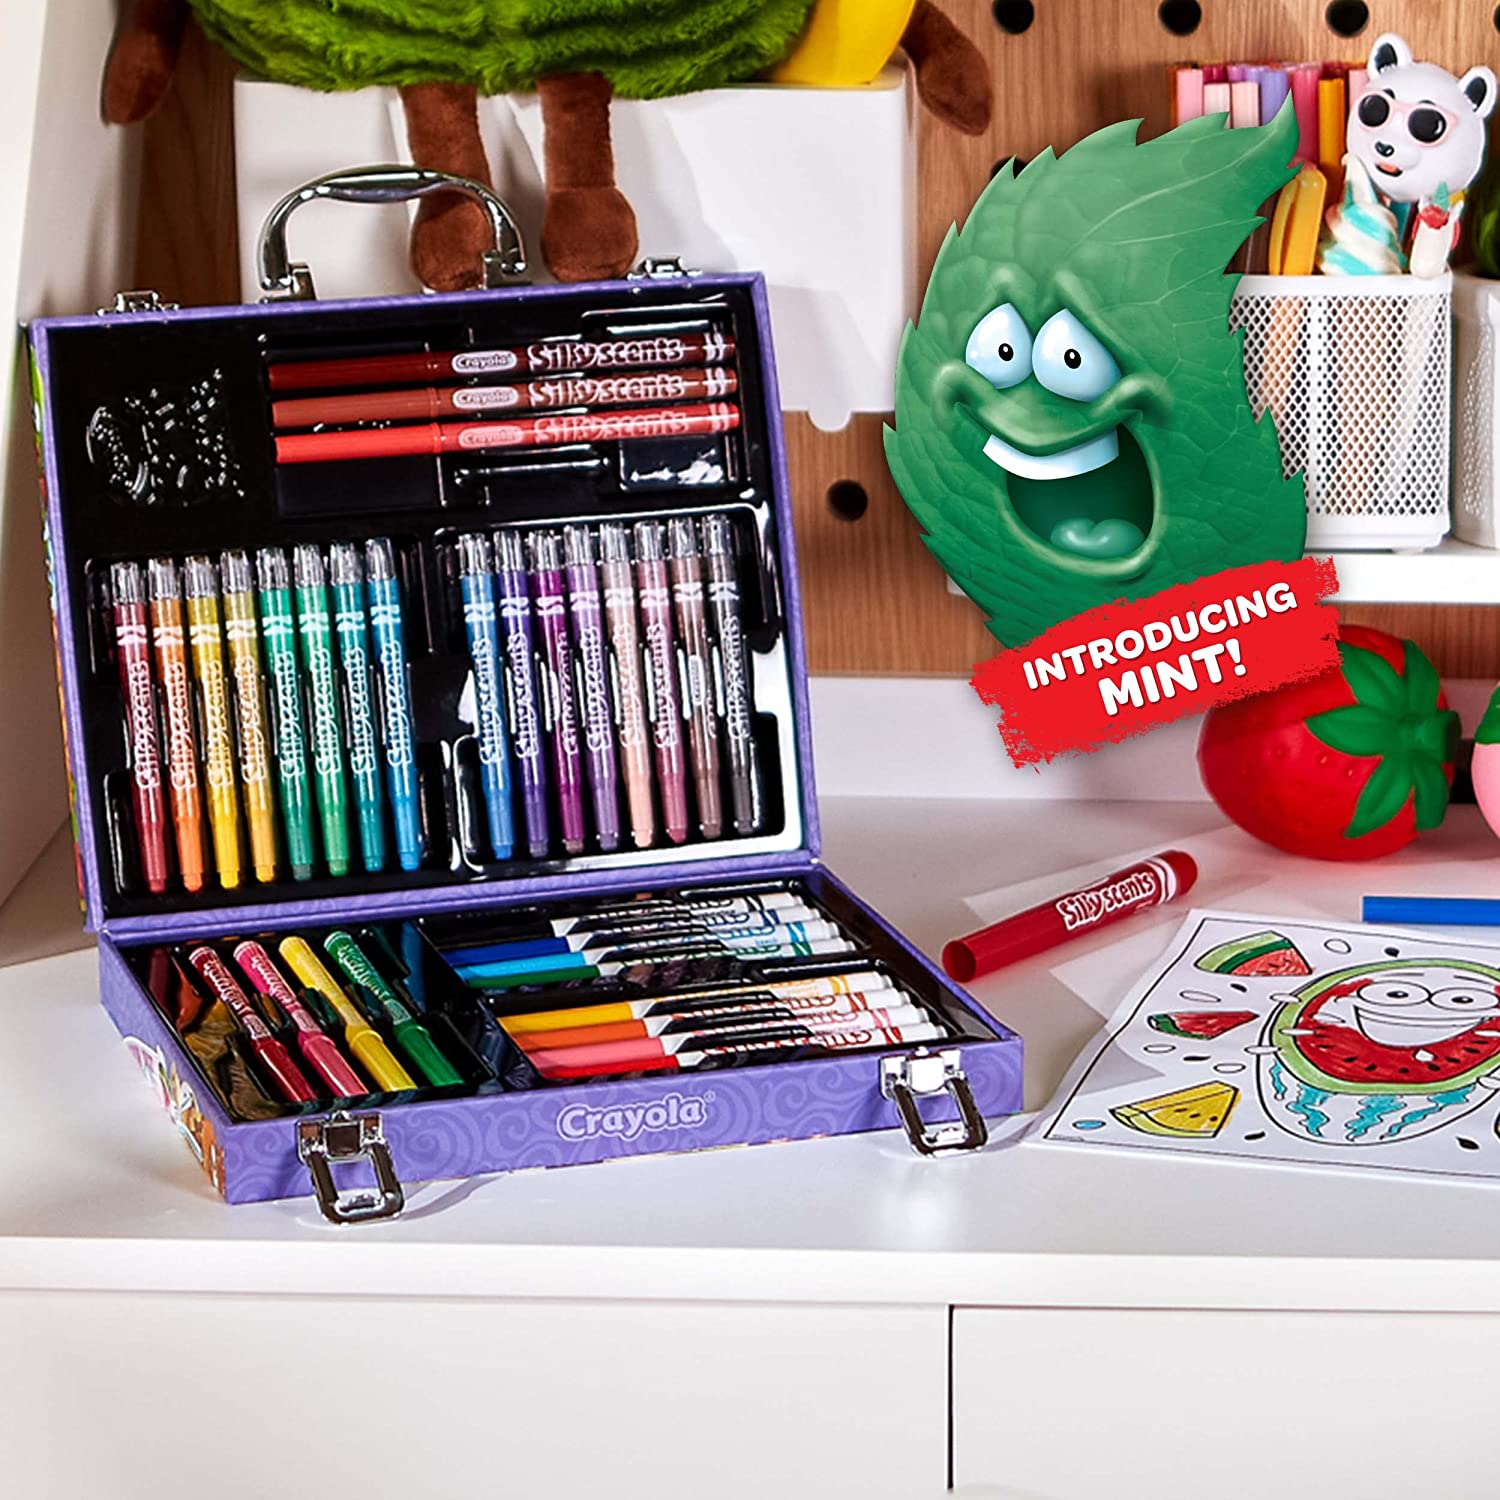 https://bigbigmart.com/wp-content/uploads/2023/02/Crayola-Silly-Scents-Mini-Inspiration-Art-Case-Coloring-Set-Gift-for-Kids-Ages-3-4-5-64.jpg